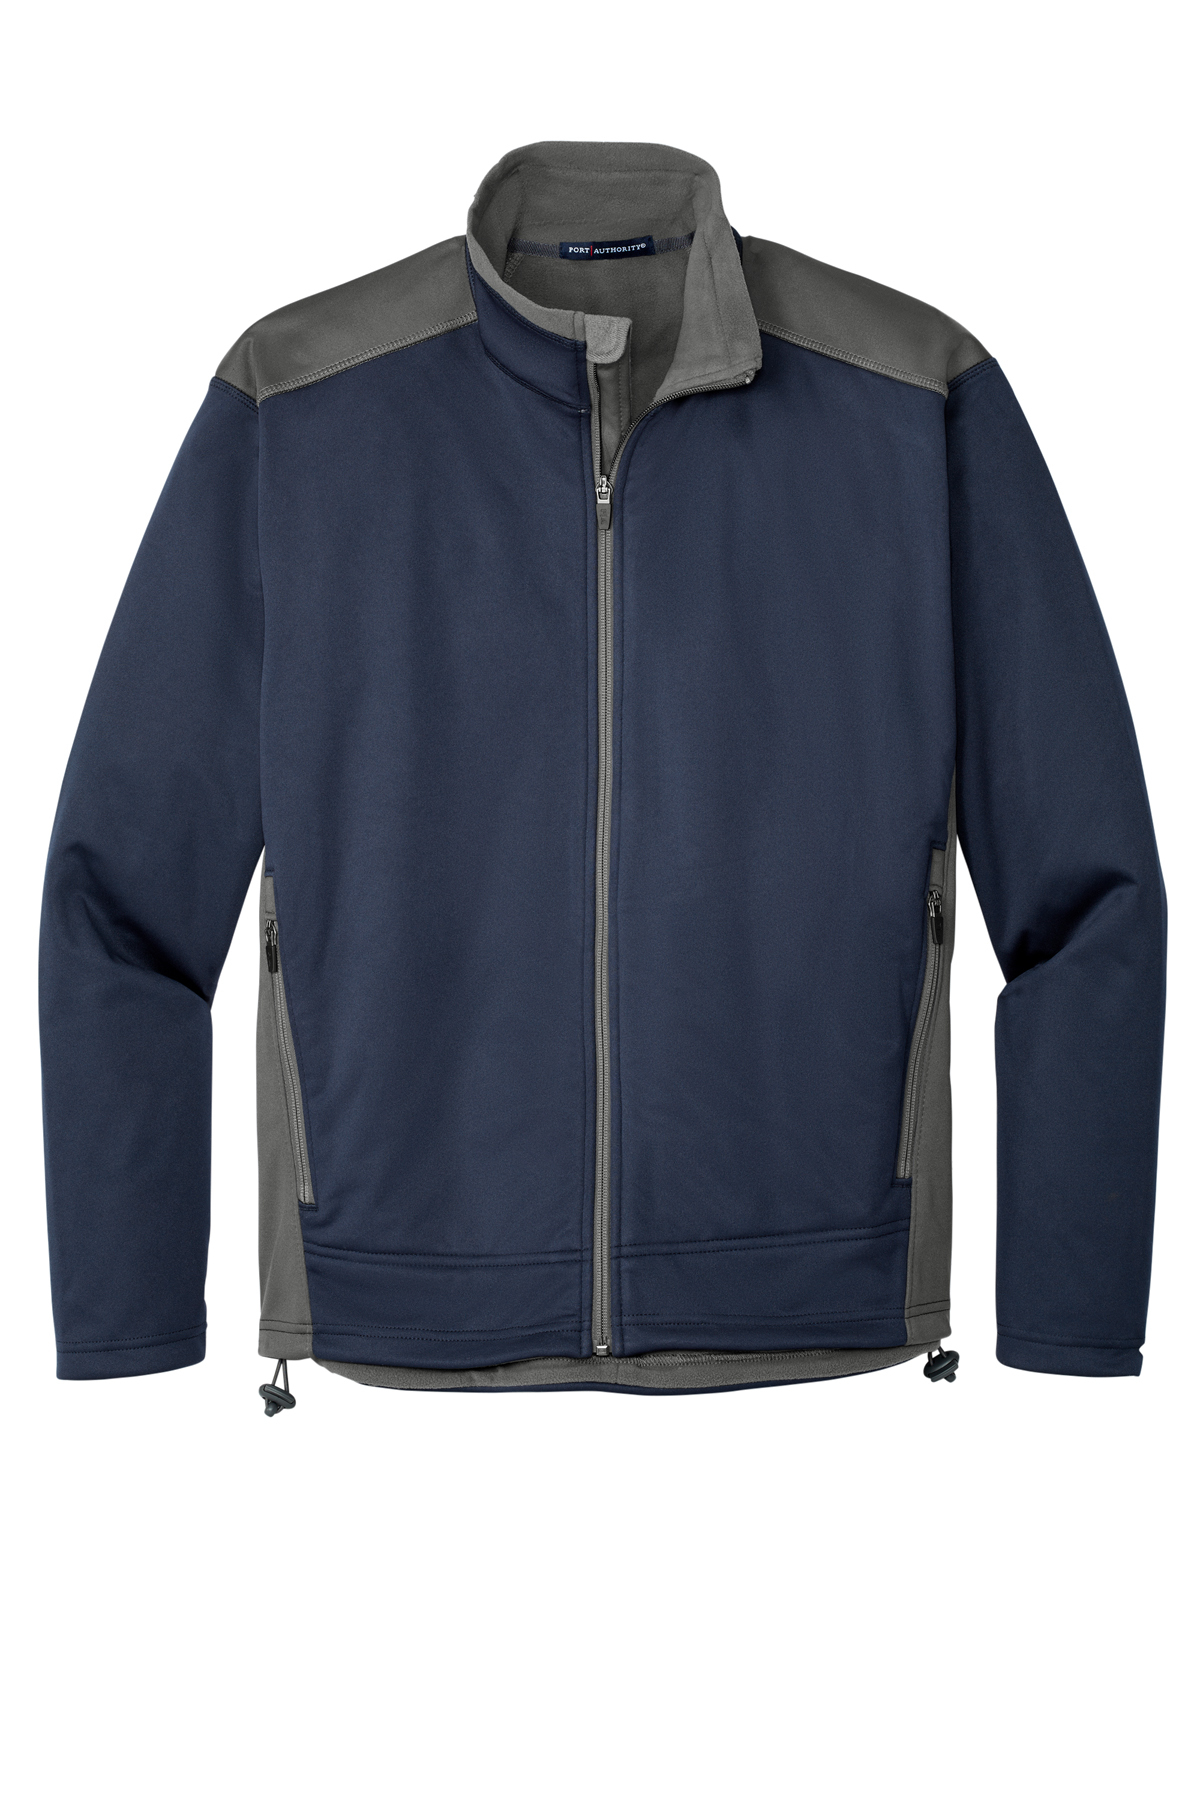 Port Authority Two-Tone Soft Shell Jacket | Product | SanMar